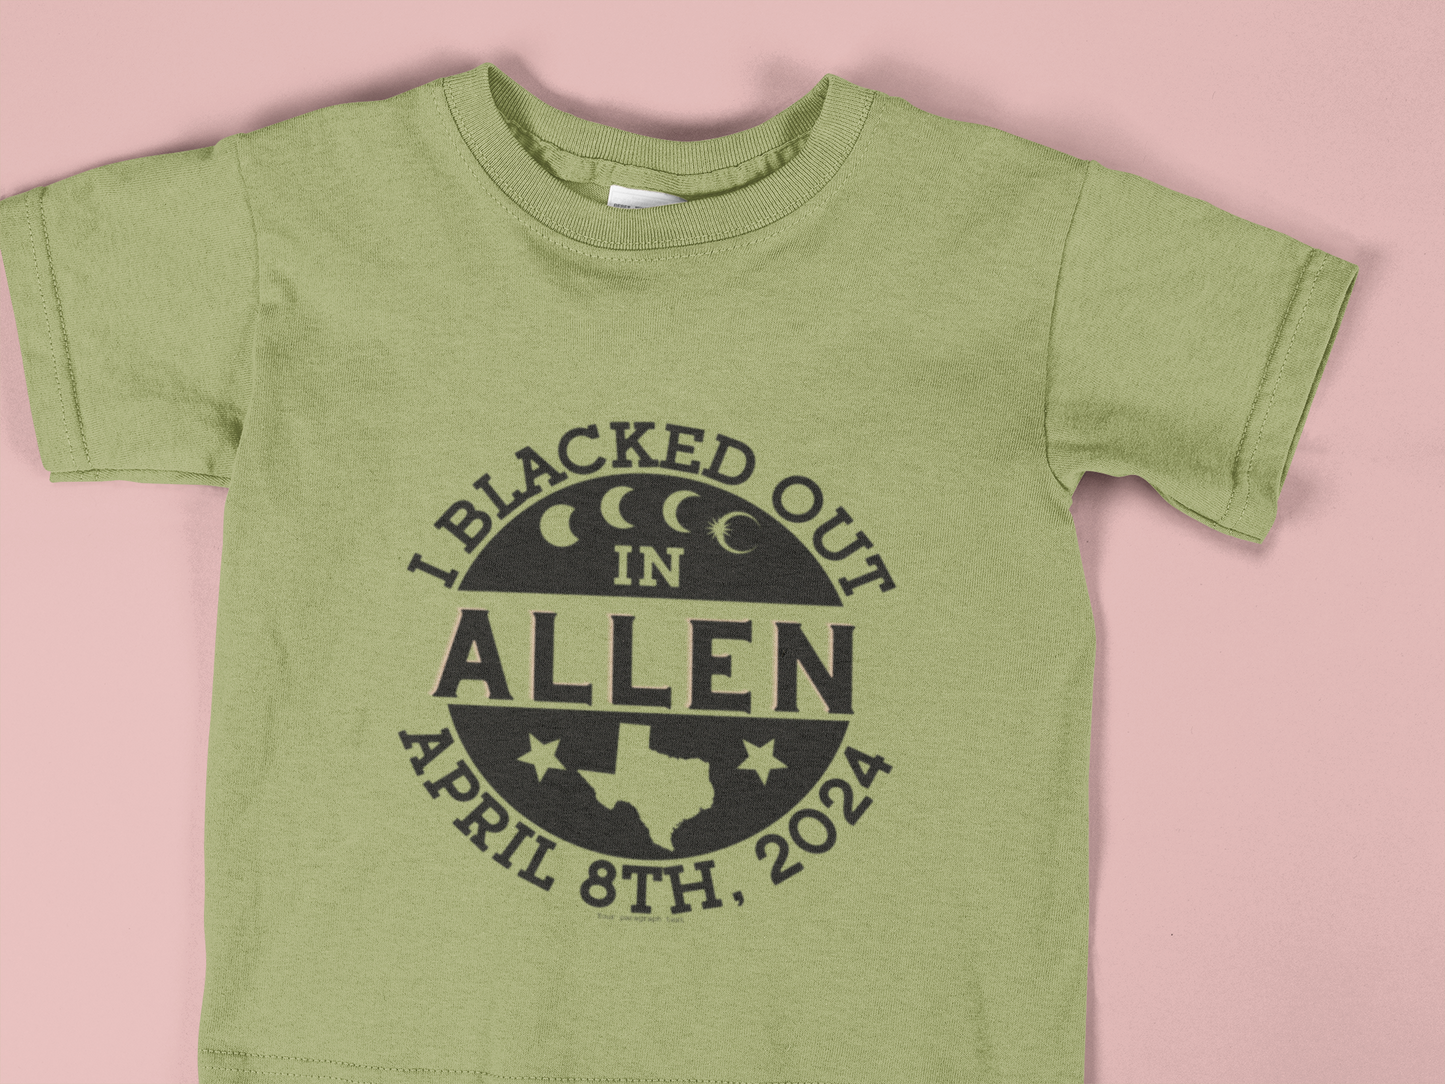 I blacked out in Allen, Texas- T-shirt